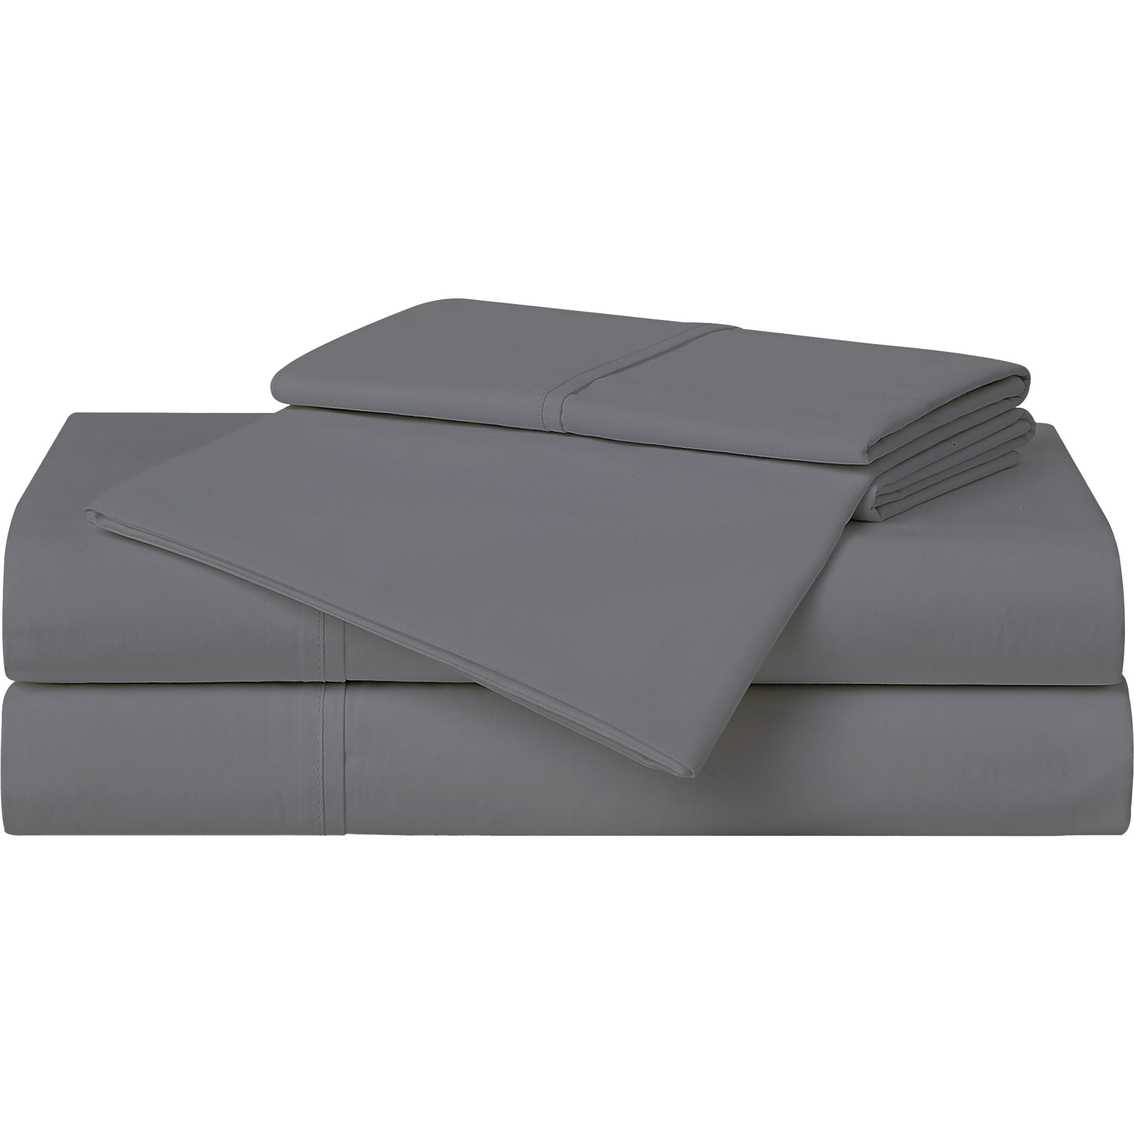 Cannon Solid Percale Sheet 4 pc. Set - Image 2 of 4